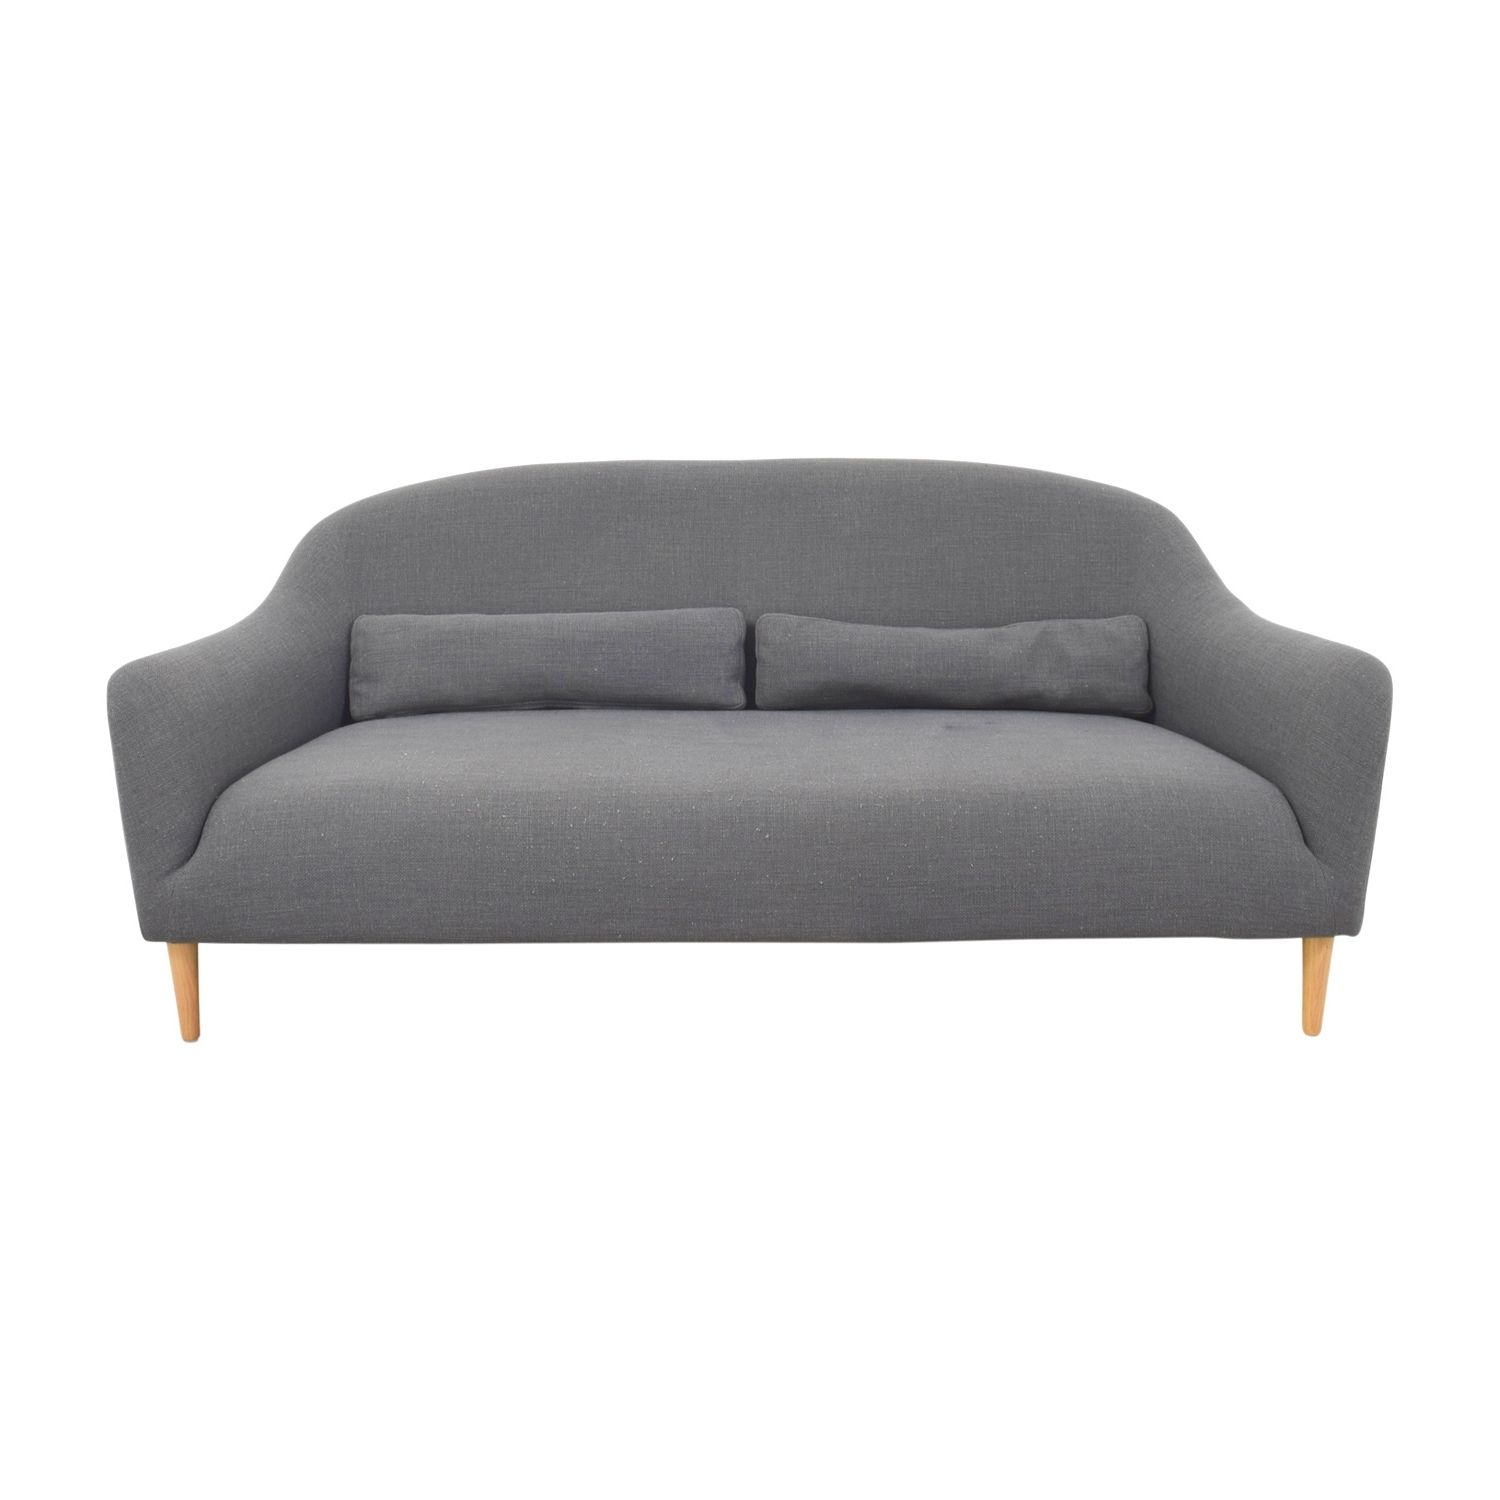 [%63% Off – Crate & Barrel Crate & Barrel Pennie Single Cushion Sofa For Current One Cushion Sofas|one Cushion Sofas Throughout 2018 63% Off – Crate & Barrel Crate & Barrel Pennie Single Cushion Sofa|most Current One Cushion Sofas In 63% Off – Crate & Barrel Crate & Barrel Pennie Single Cushion Sofa|2019 63% Off – Crate & Barrel Crate & Barrel Pennie Single Cushion Sofa In One Cushion Sofas%] (View 13 of 20)